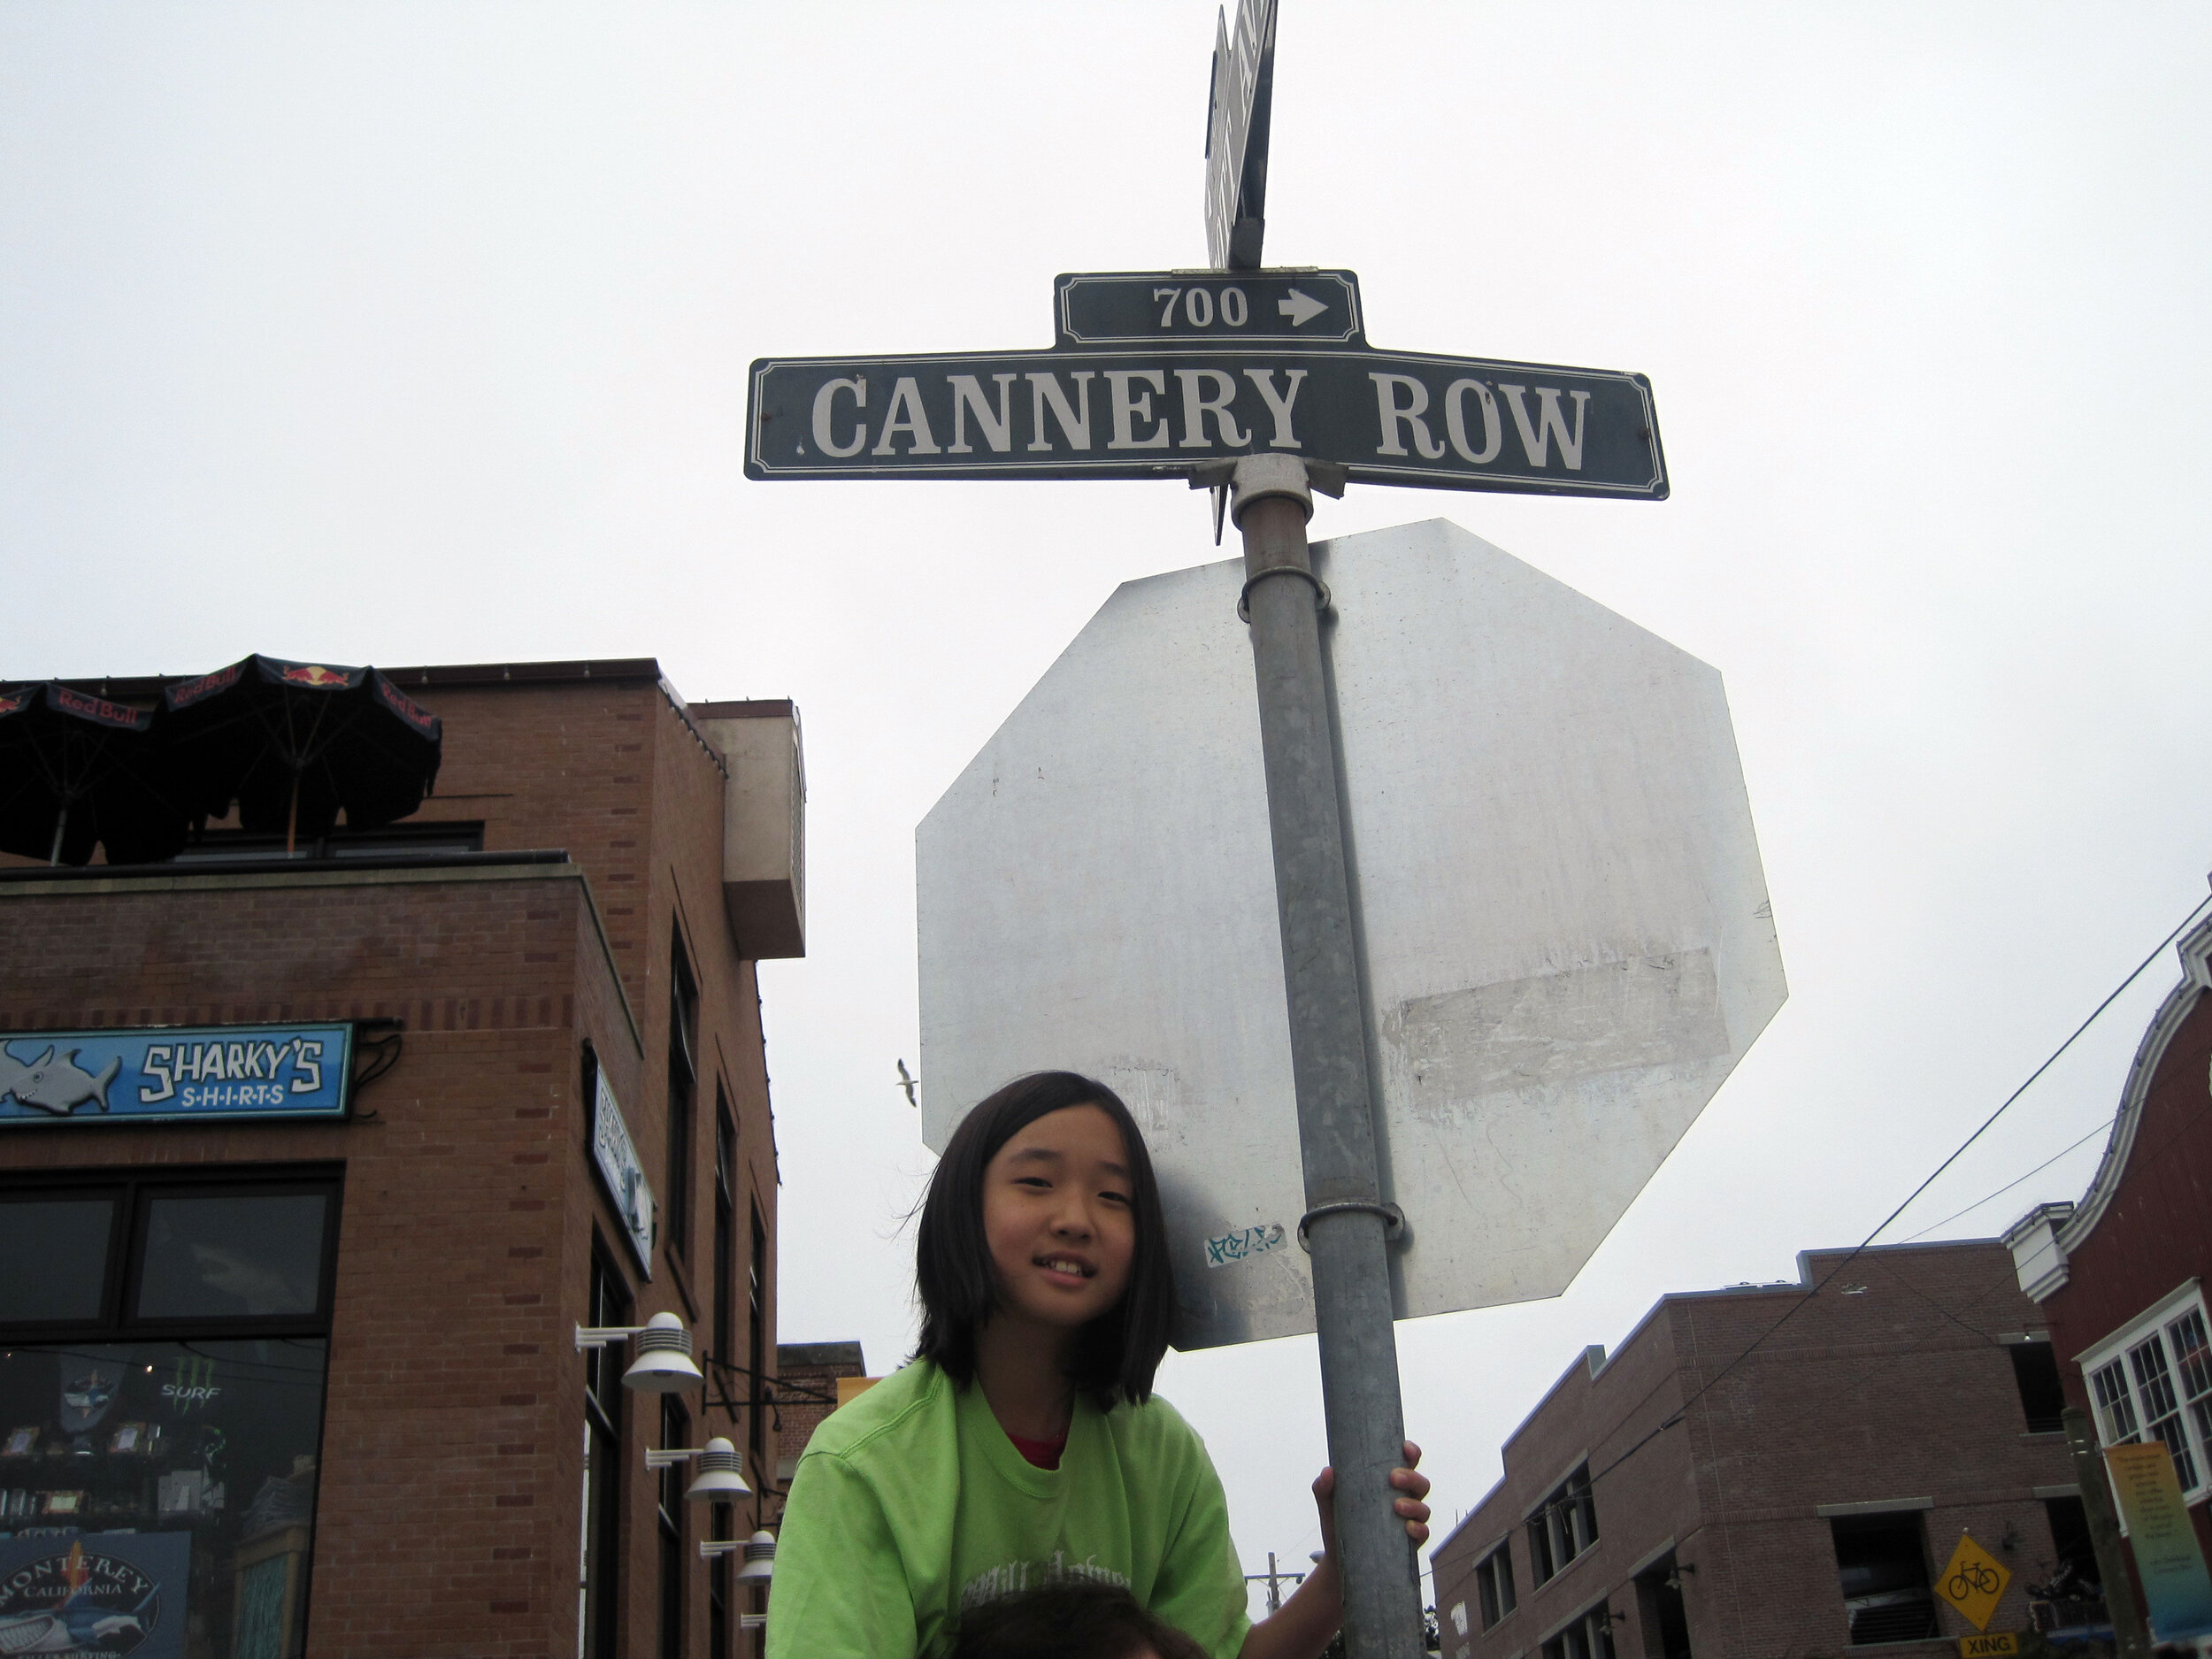  Heather (with a little help from Rafe) gets closer to Cannery Row 